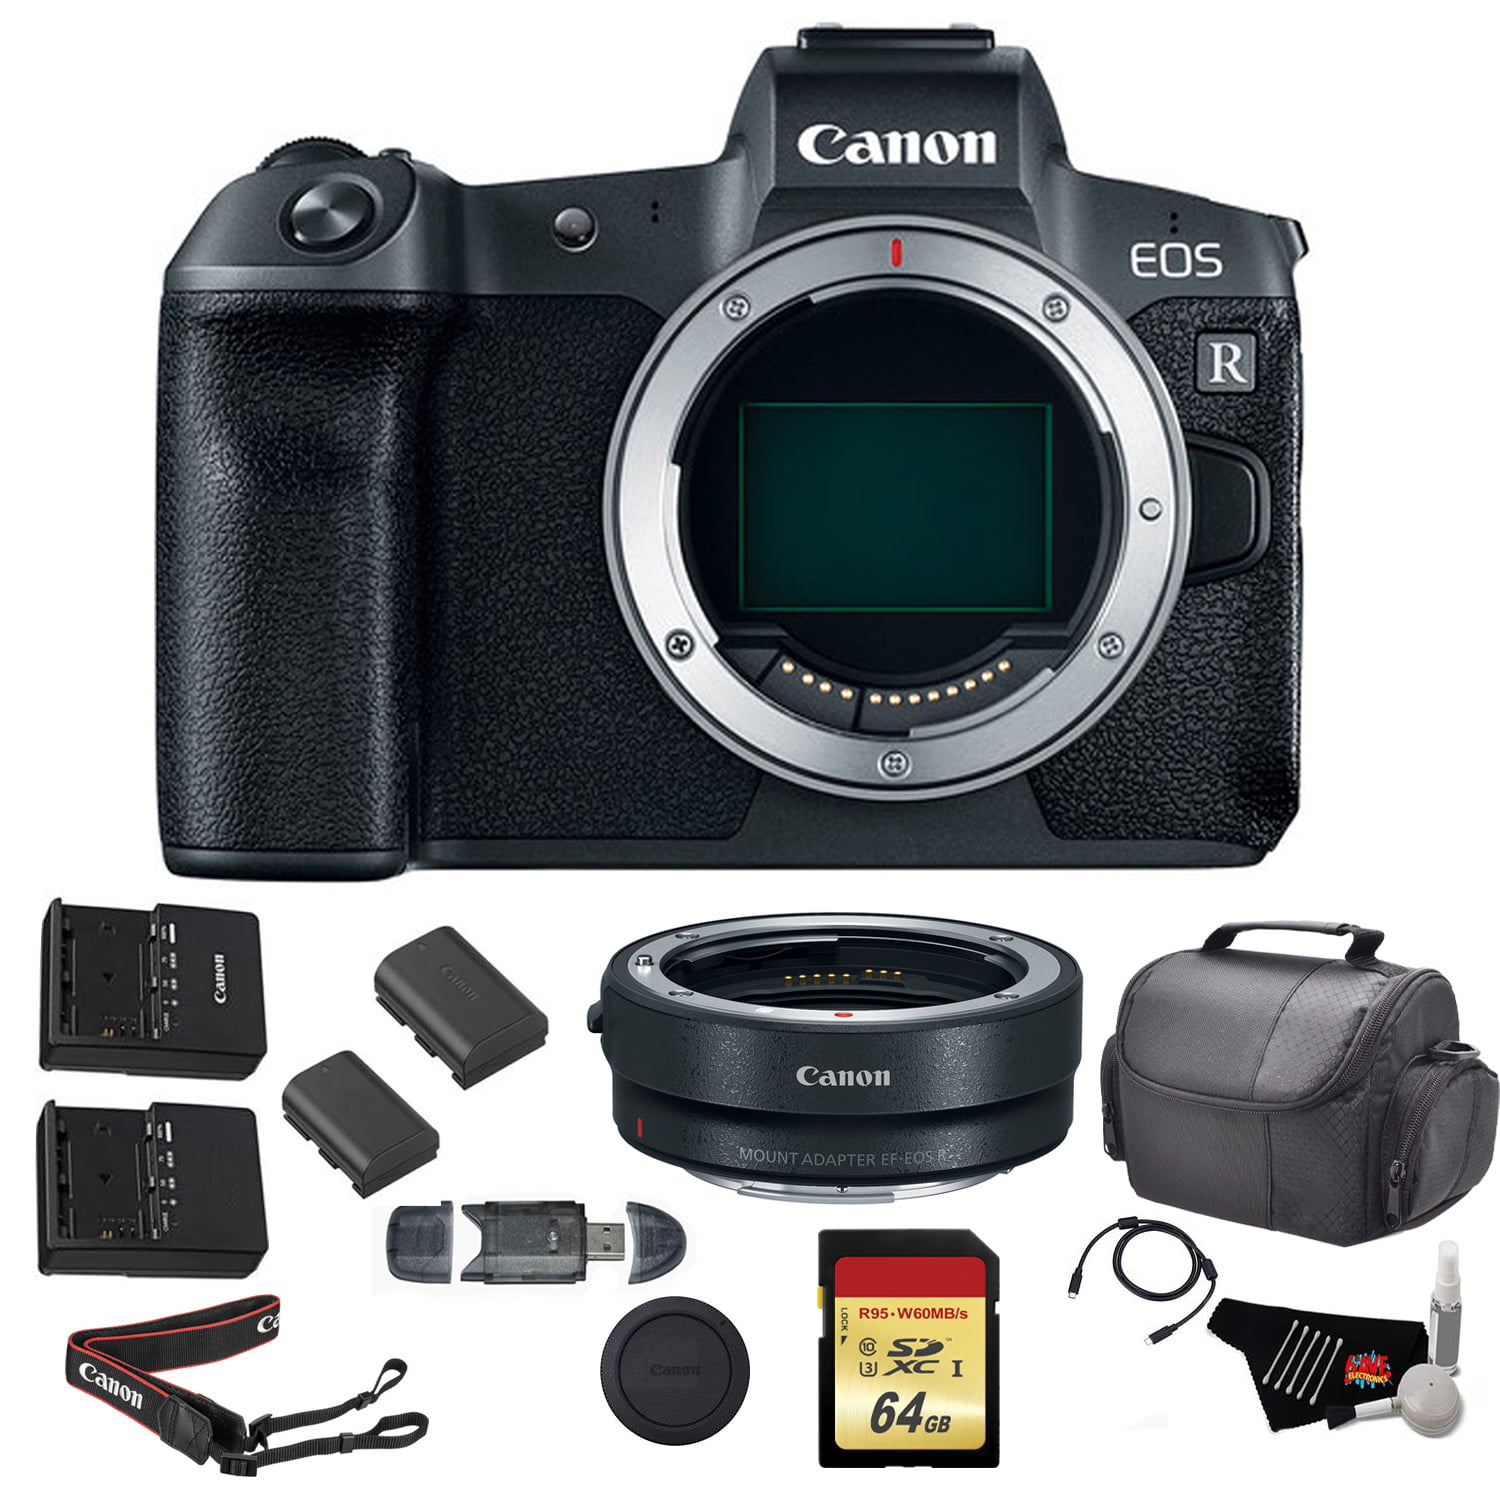 Mount Adapter EF-EOS R A-Cell Accessories Bundle Canon EOS R Mirrorless Digital Camera 30.3 MP Full Frame Sensor with RF 24-105mm f/4-7.1 STM Lens SanDisk 128GB Memory Card 